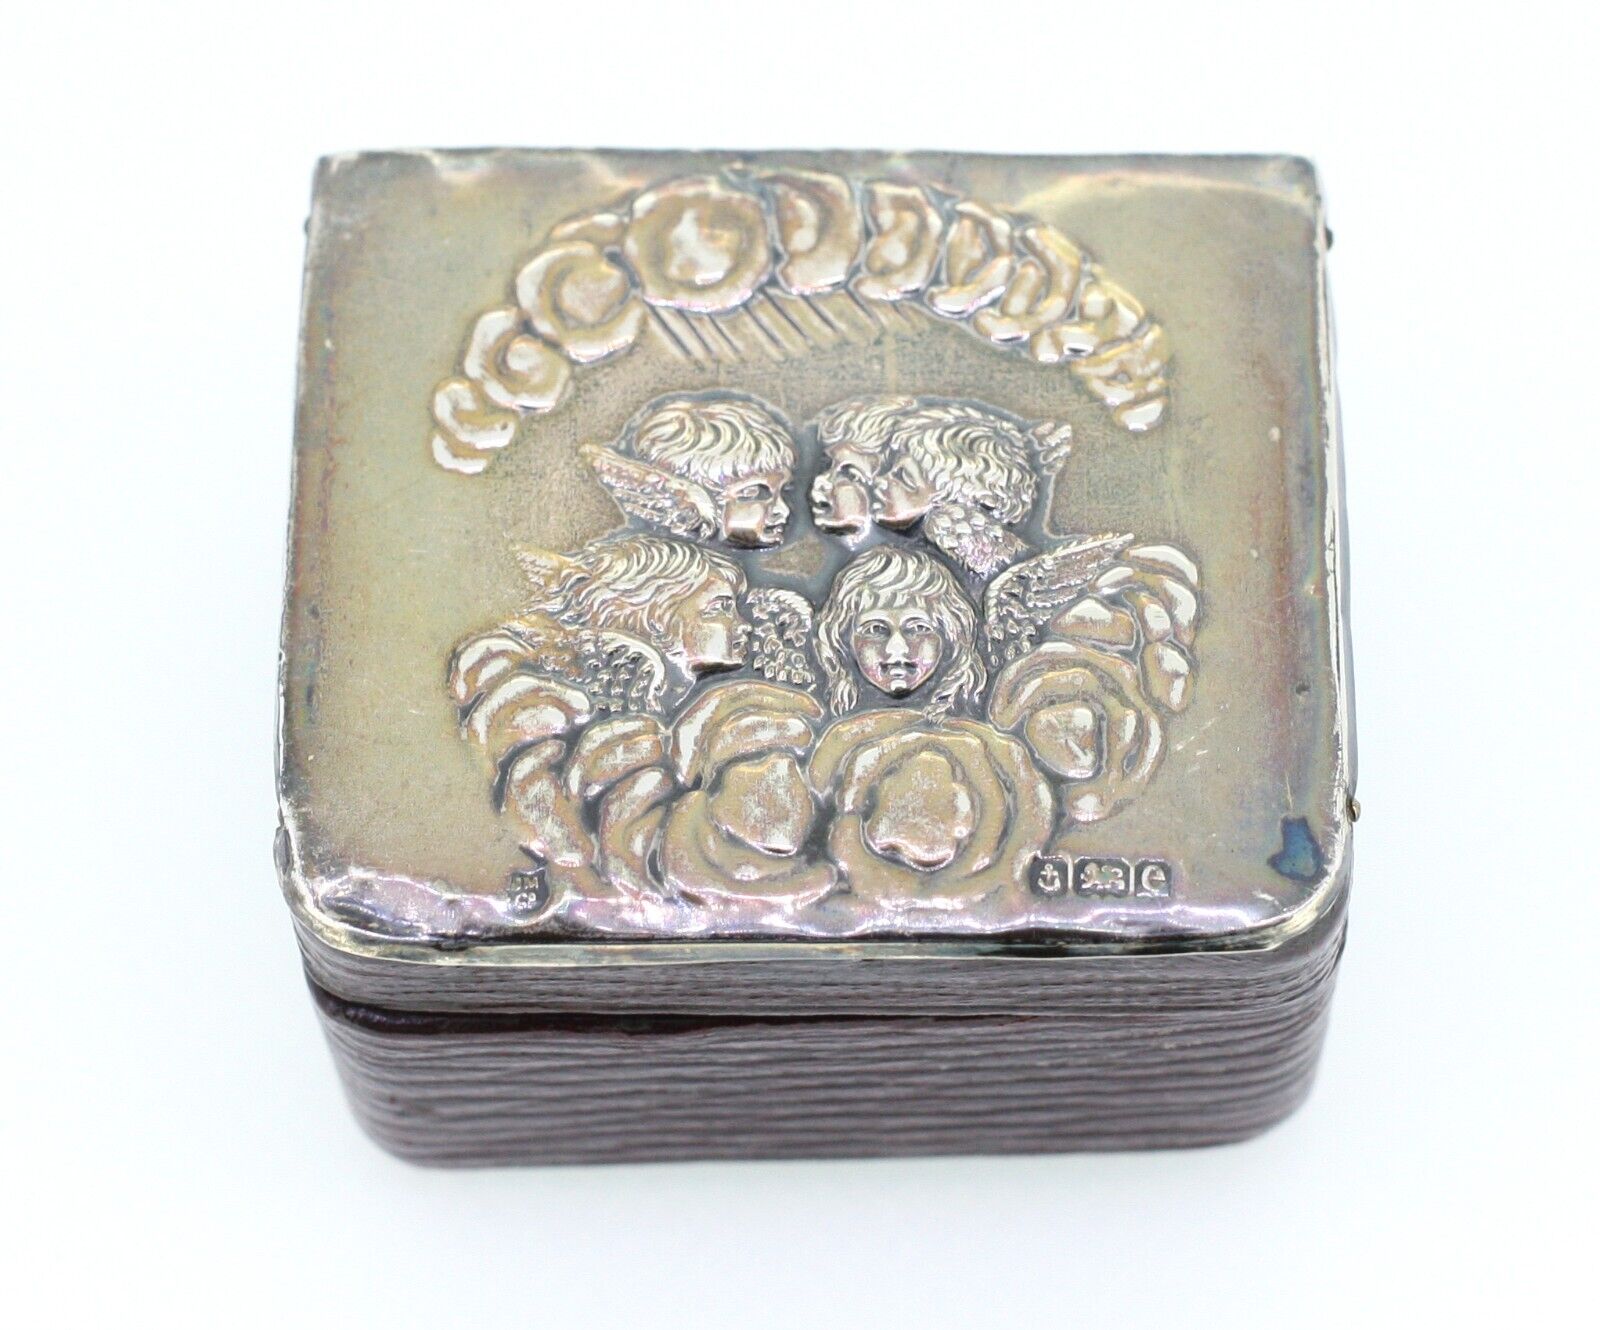 Victorian antique handmade pin box with faerie design on silver hallmarked lid